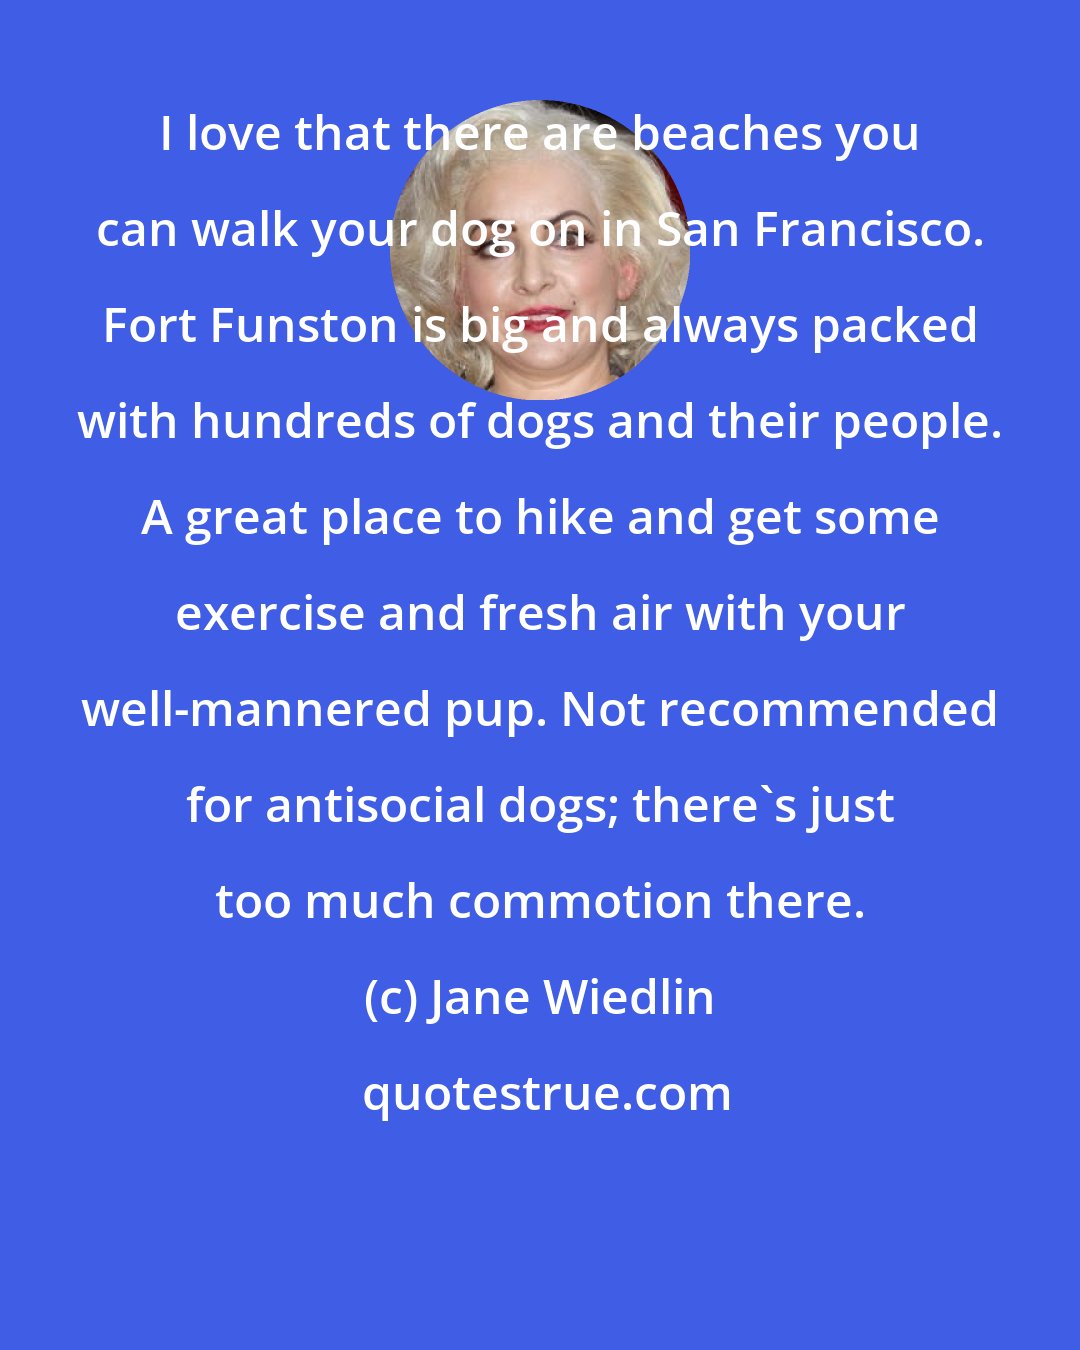 Jane Wiedlin: I love that there are beaches you can walk your dog on in San Francisco. Fort Funston is big and always packed with hundreds of dogs and their people. A great place to hike and get some exercise and fresh air with your well-mannered pup. Not recommended for antisocial dogs; there's just too much commotion there.